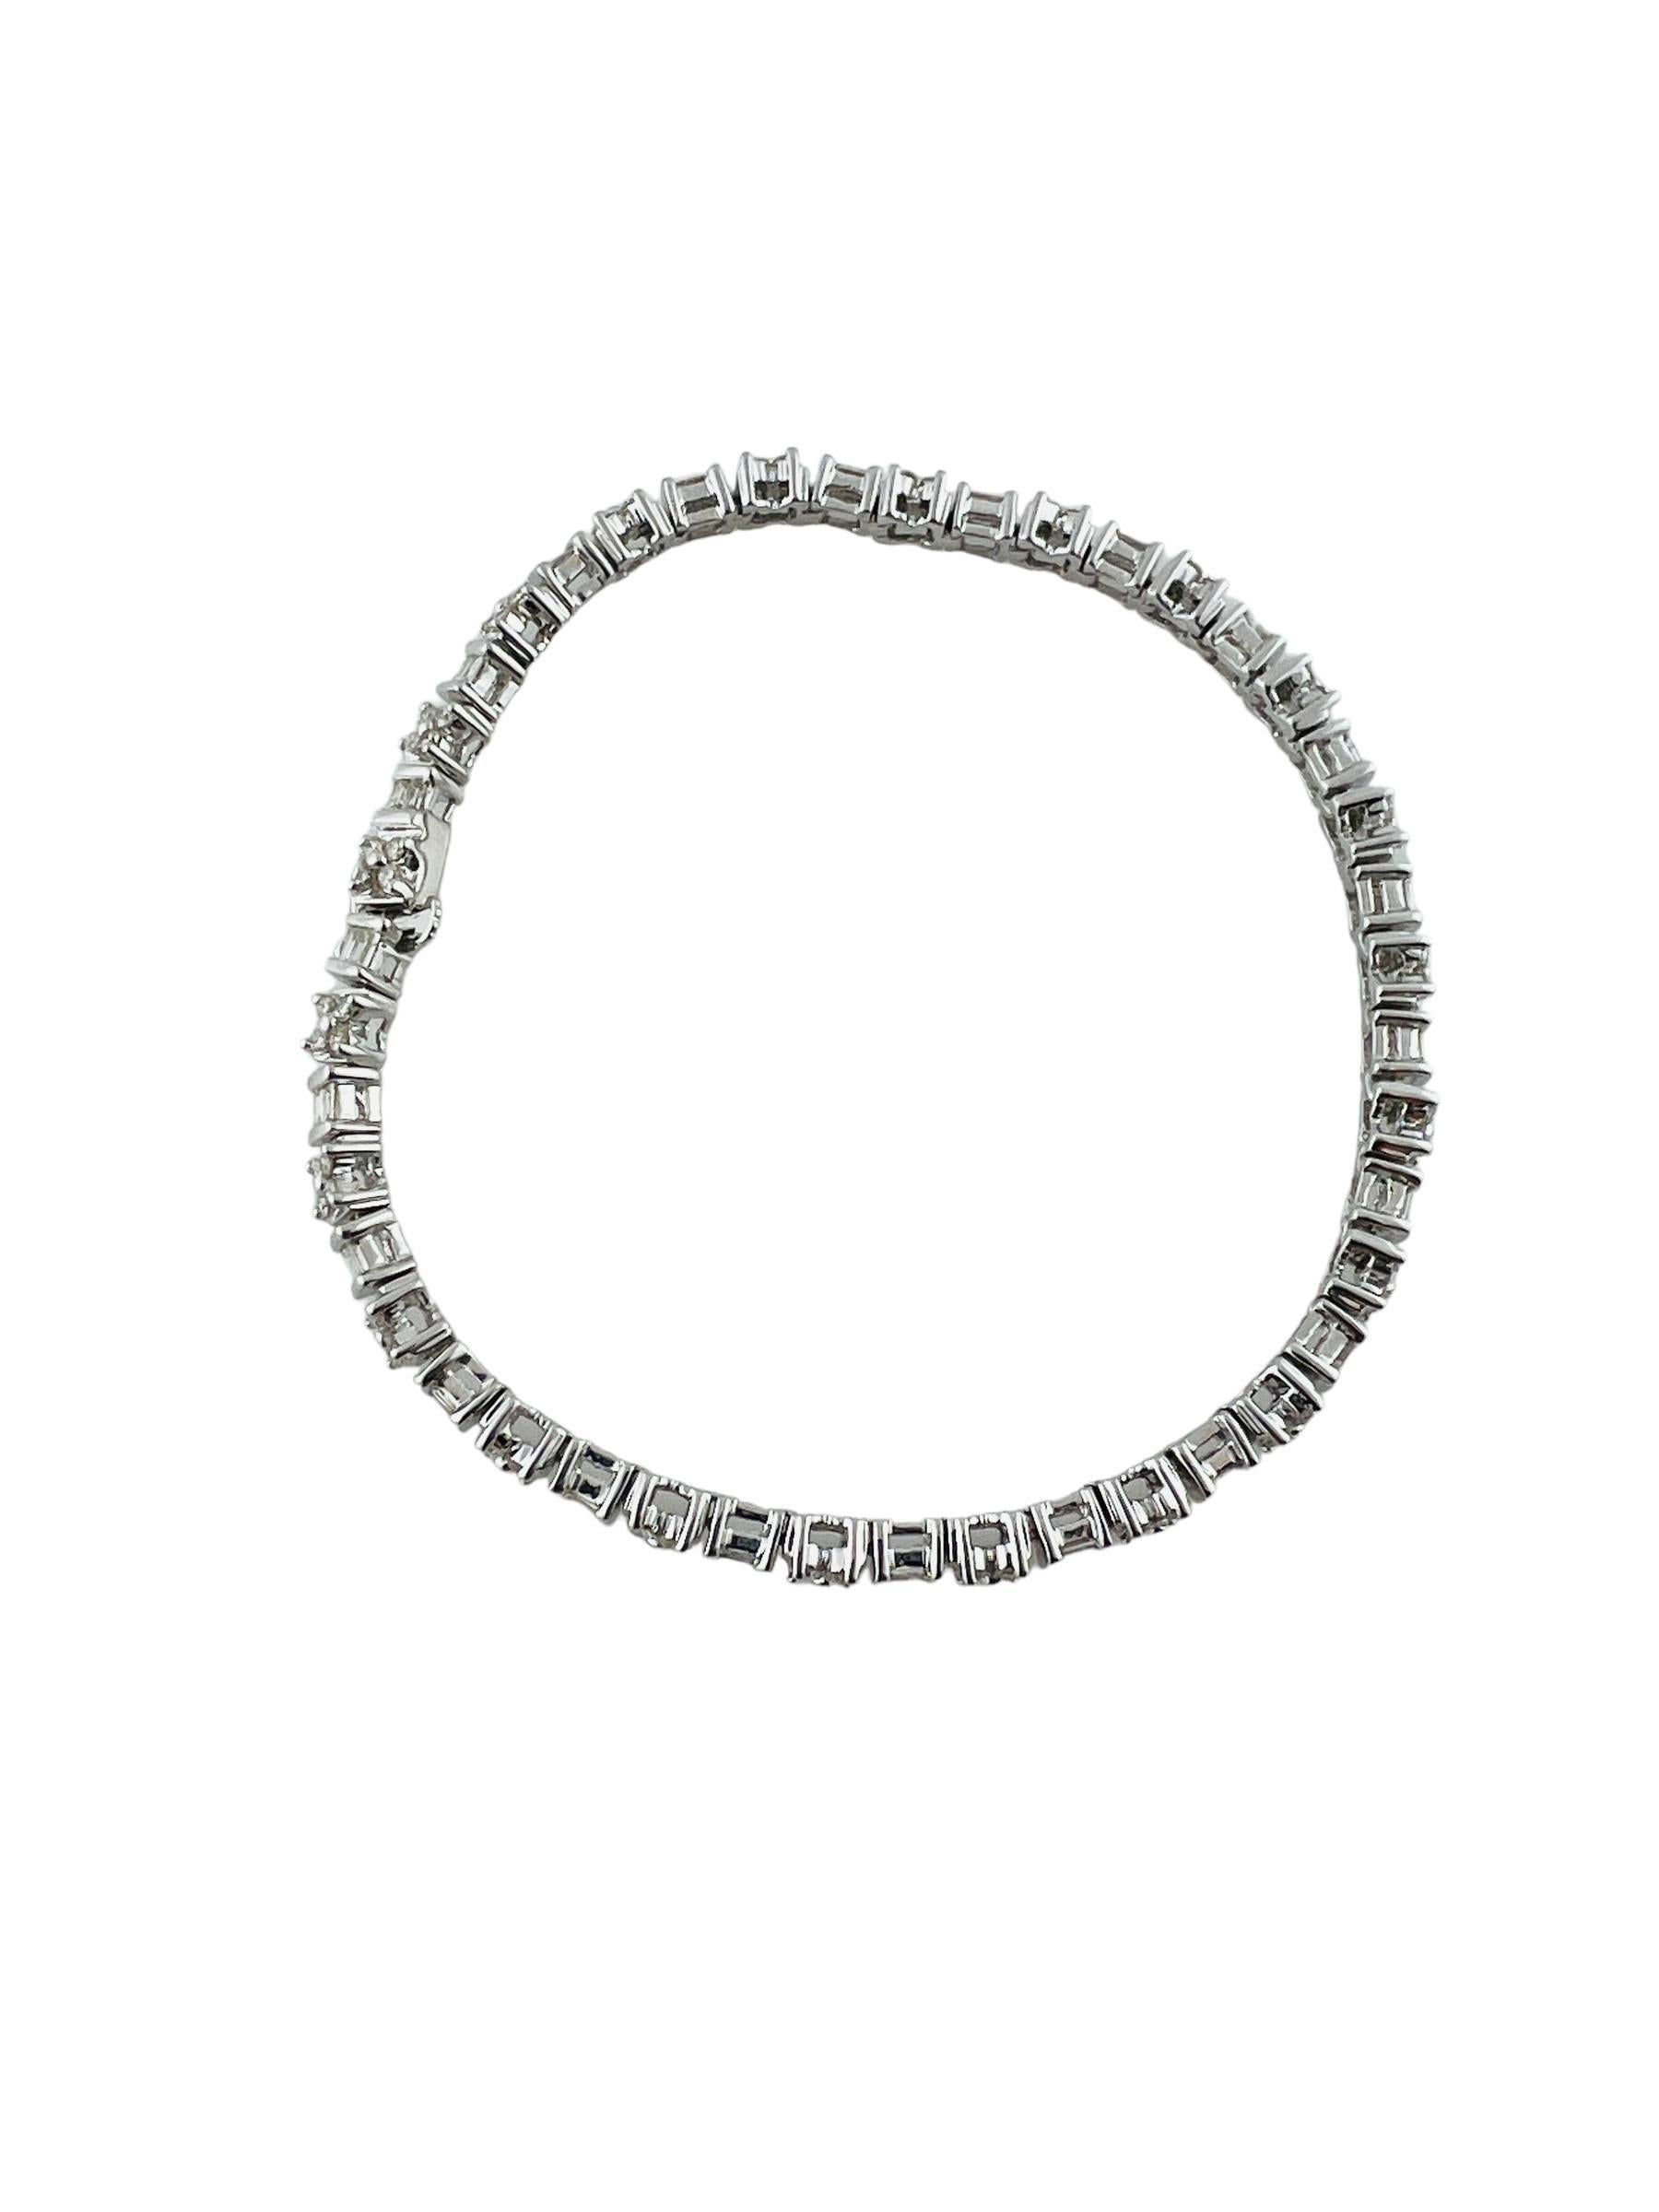 14K White Gold Diamond Tennis Bracelet Floral Accents #16543 In Good Condition For Sale In Washington Depot, CT